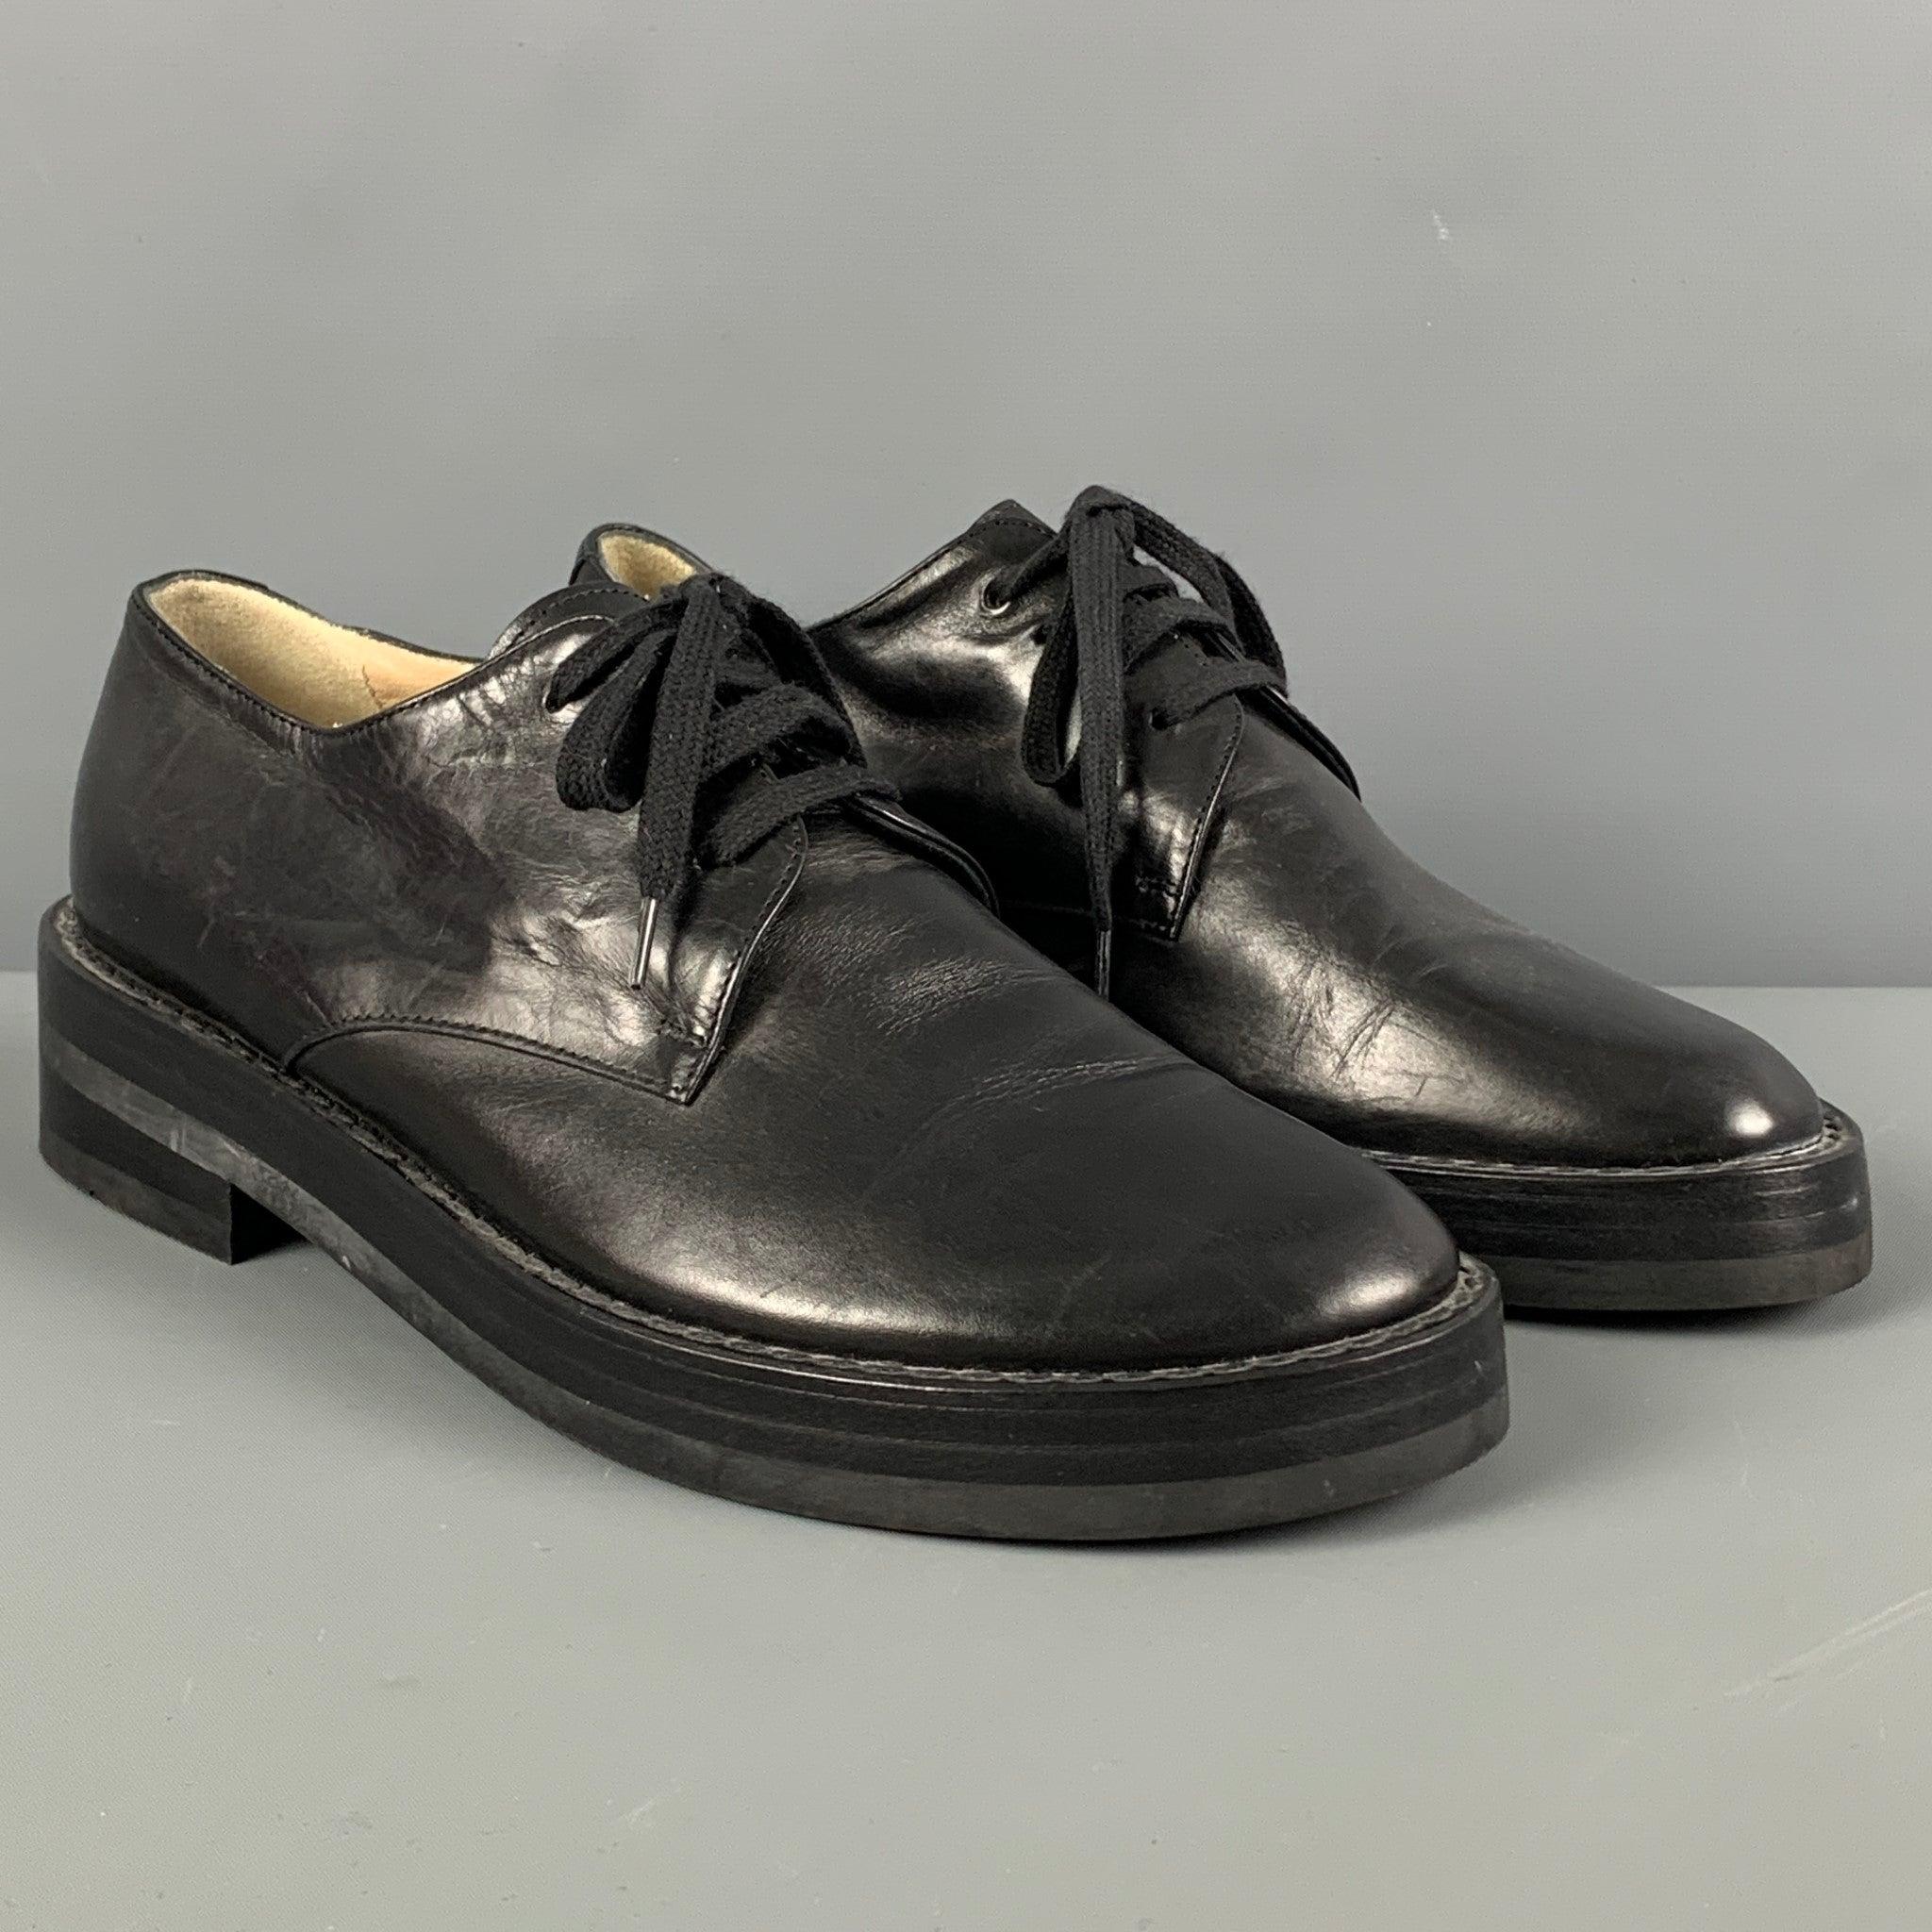 ANN DEMEULEMEESTER shoes comes in a black leather featuring a platform sole and a lace up closure. Made in Italy.
Very Good
Pre-Owned Condition. Light wear. As-is.  

Marked:   37.5Outsole: 10.75 inches  x 4.25 inches 
  
  
 
Reference: